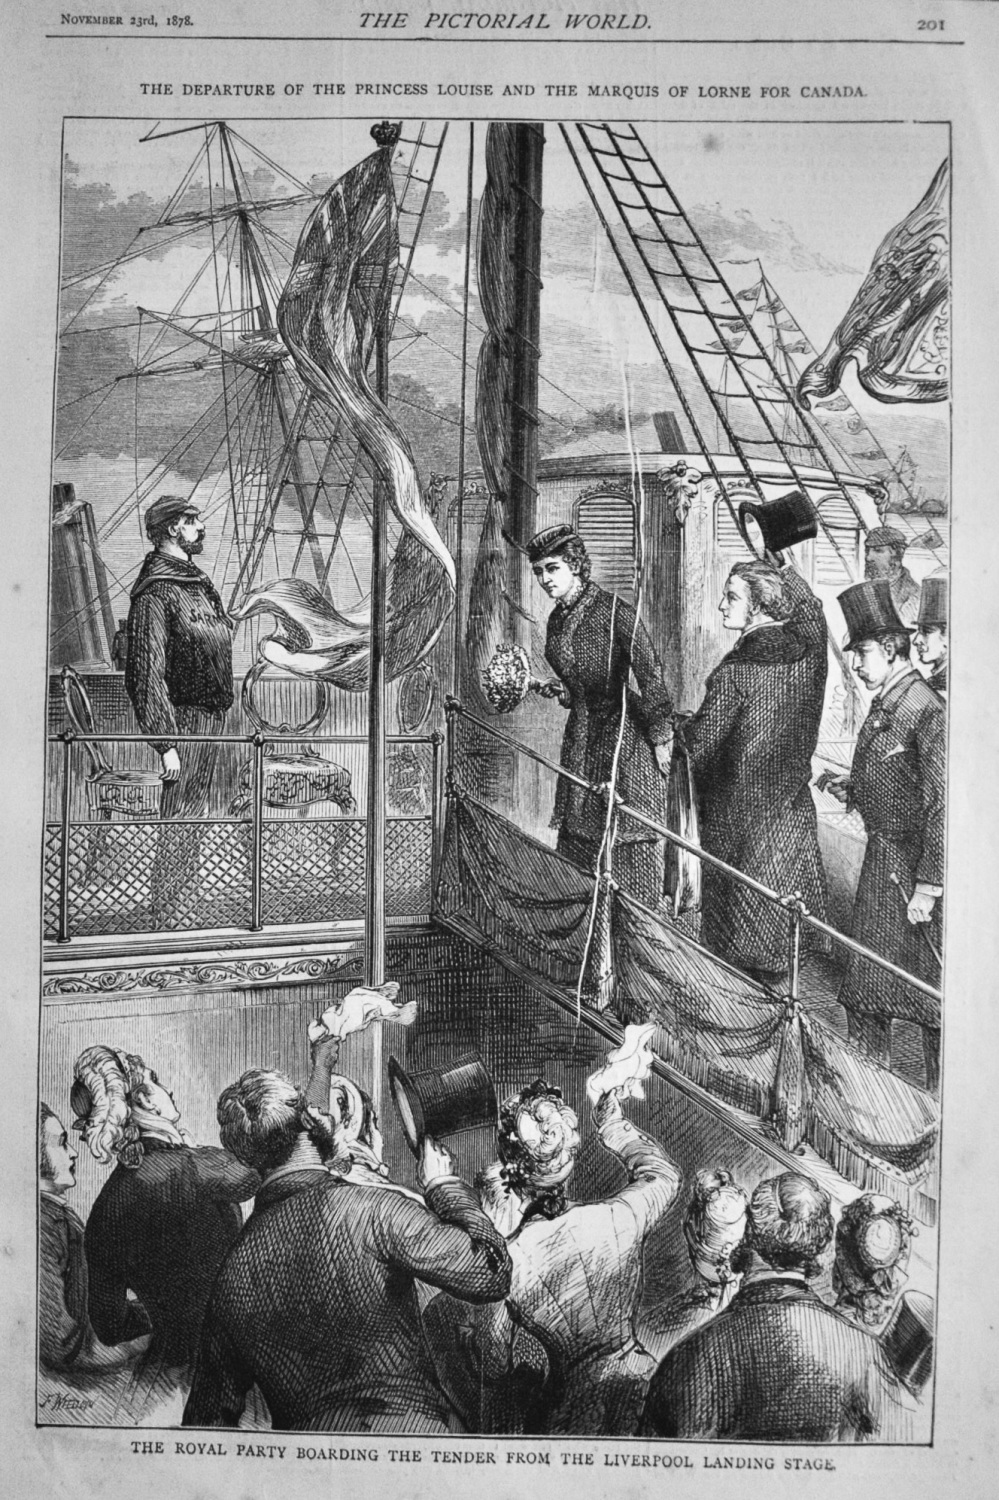 The Departure of the Princess Louise and the Marquis of Lorne for Canada.  